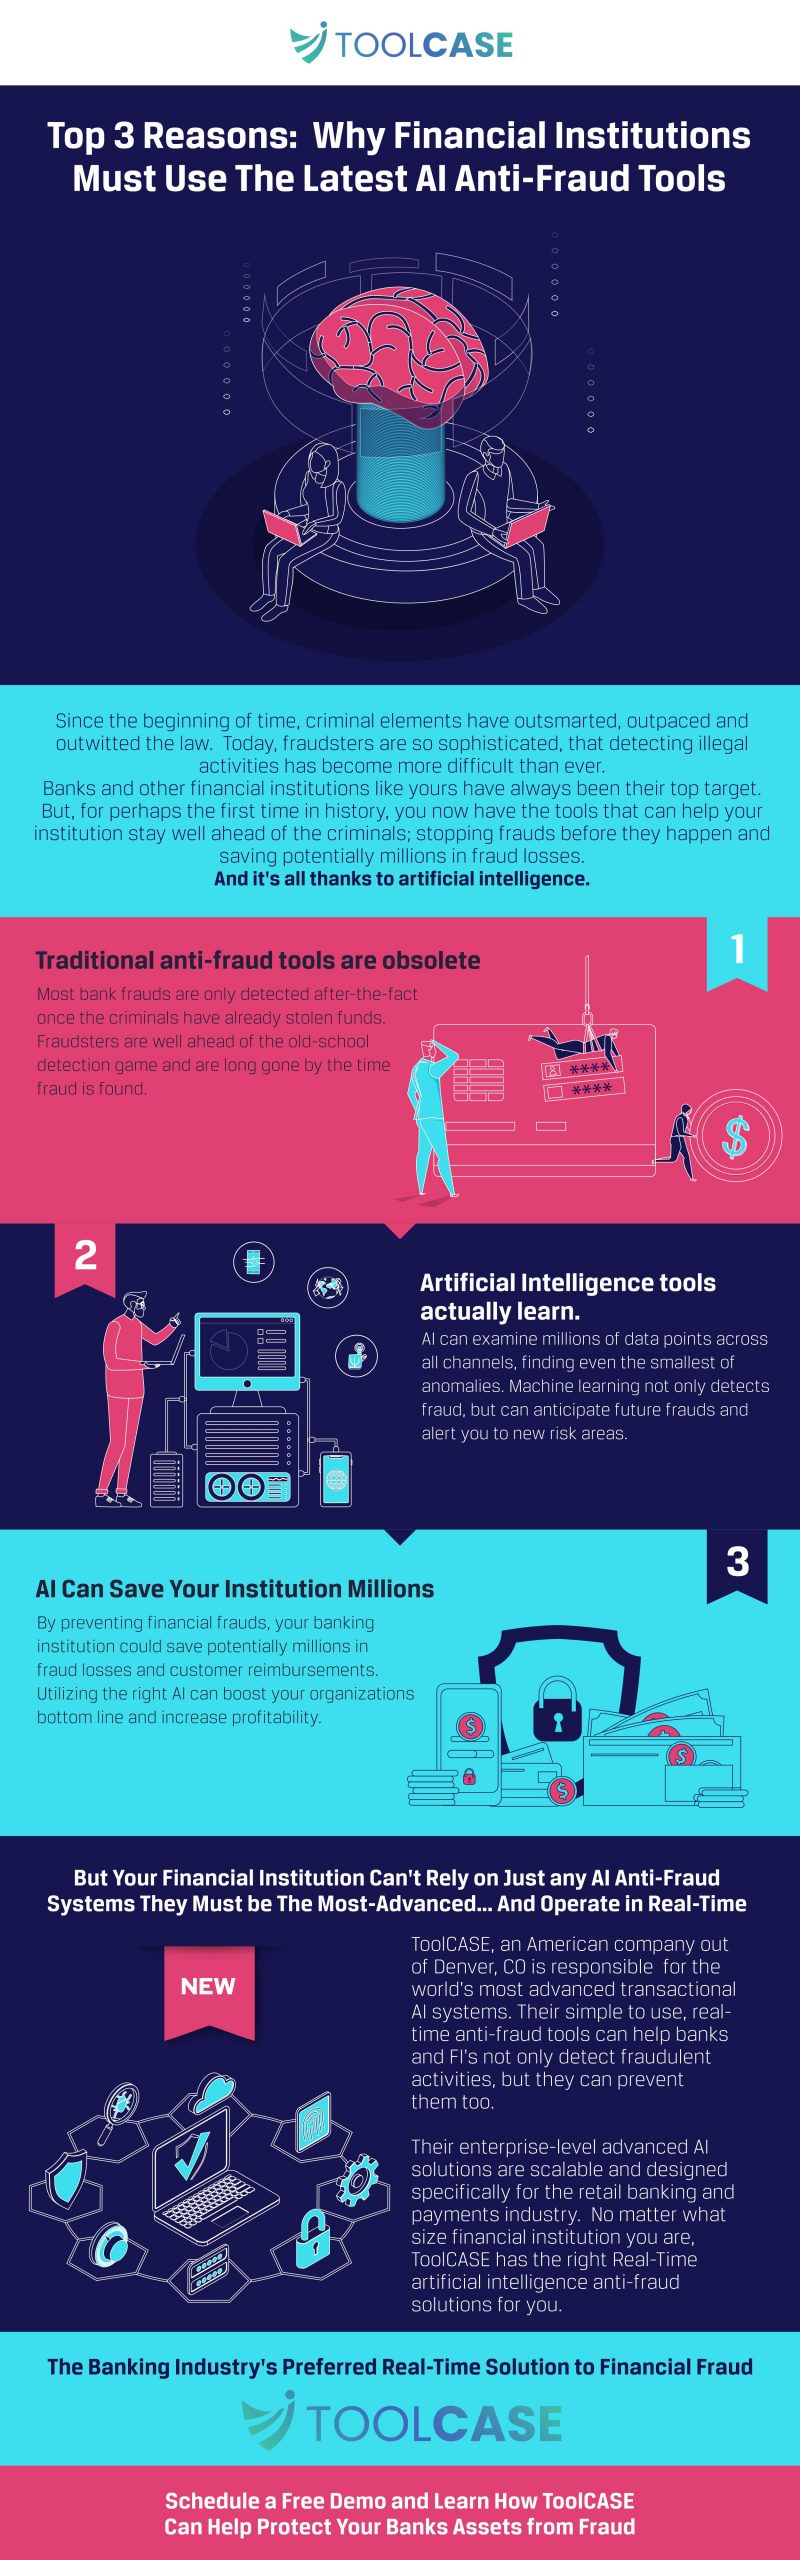 Top 3 Reasons: Why Financial Institutions Must Use The Latest AI Anti-Fraud Tools